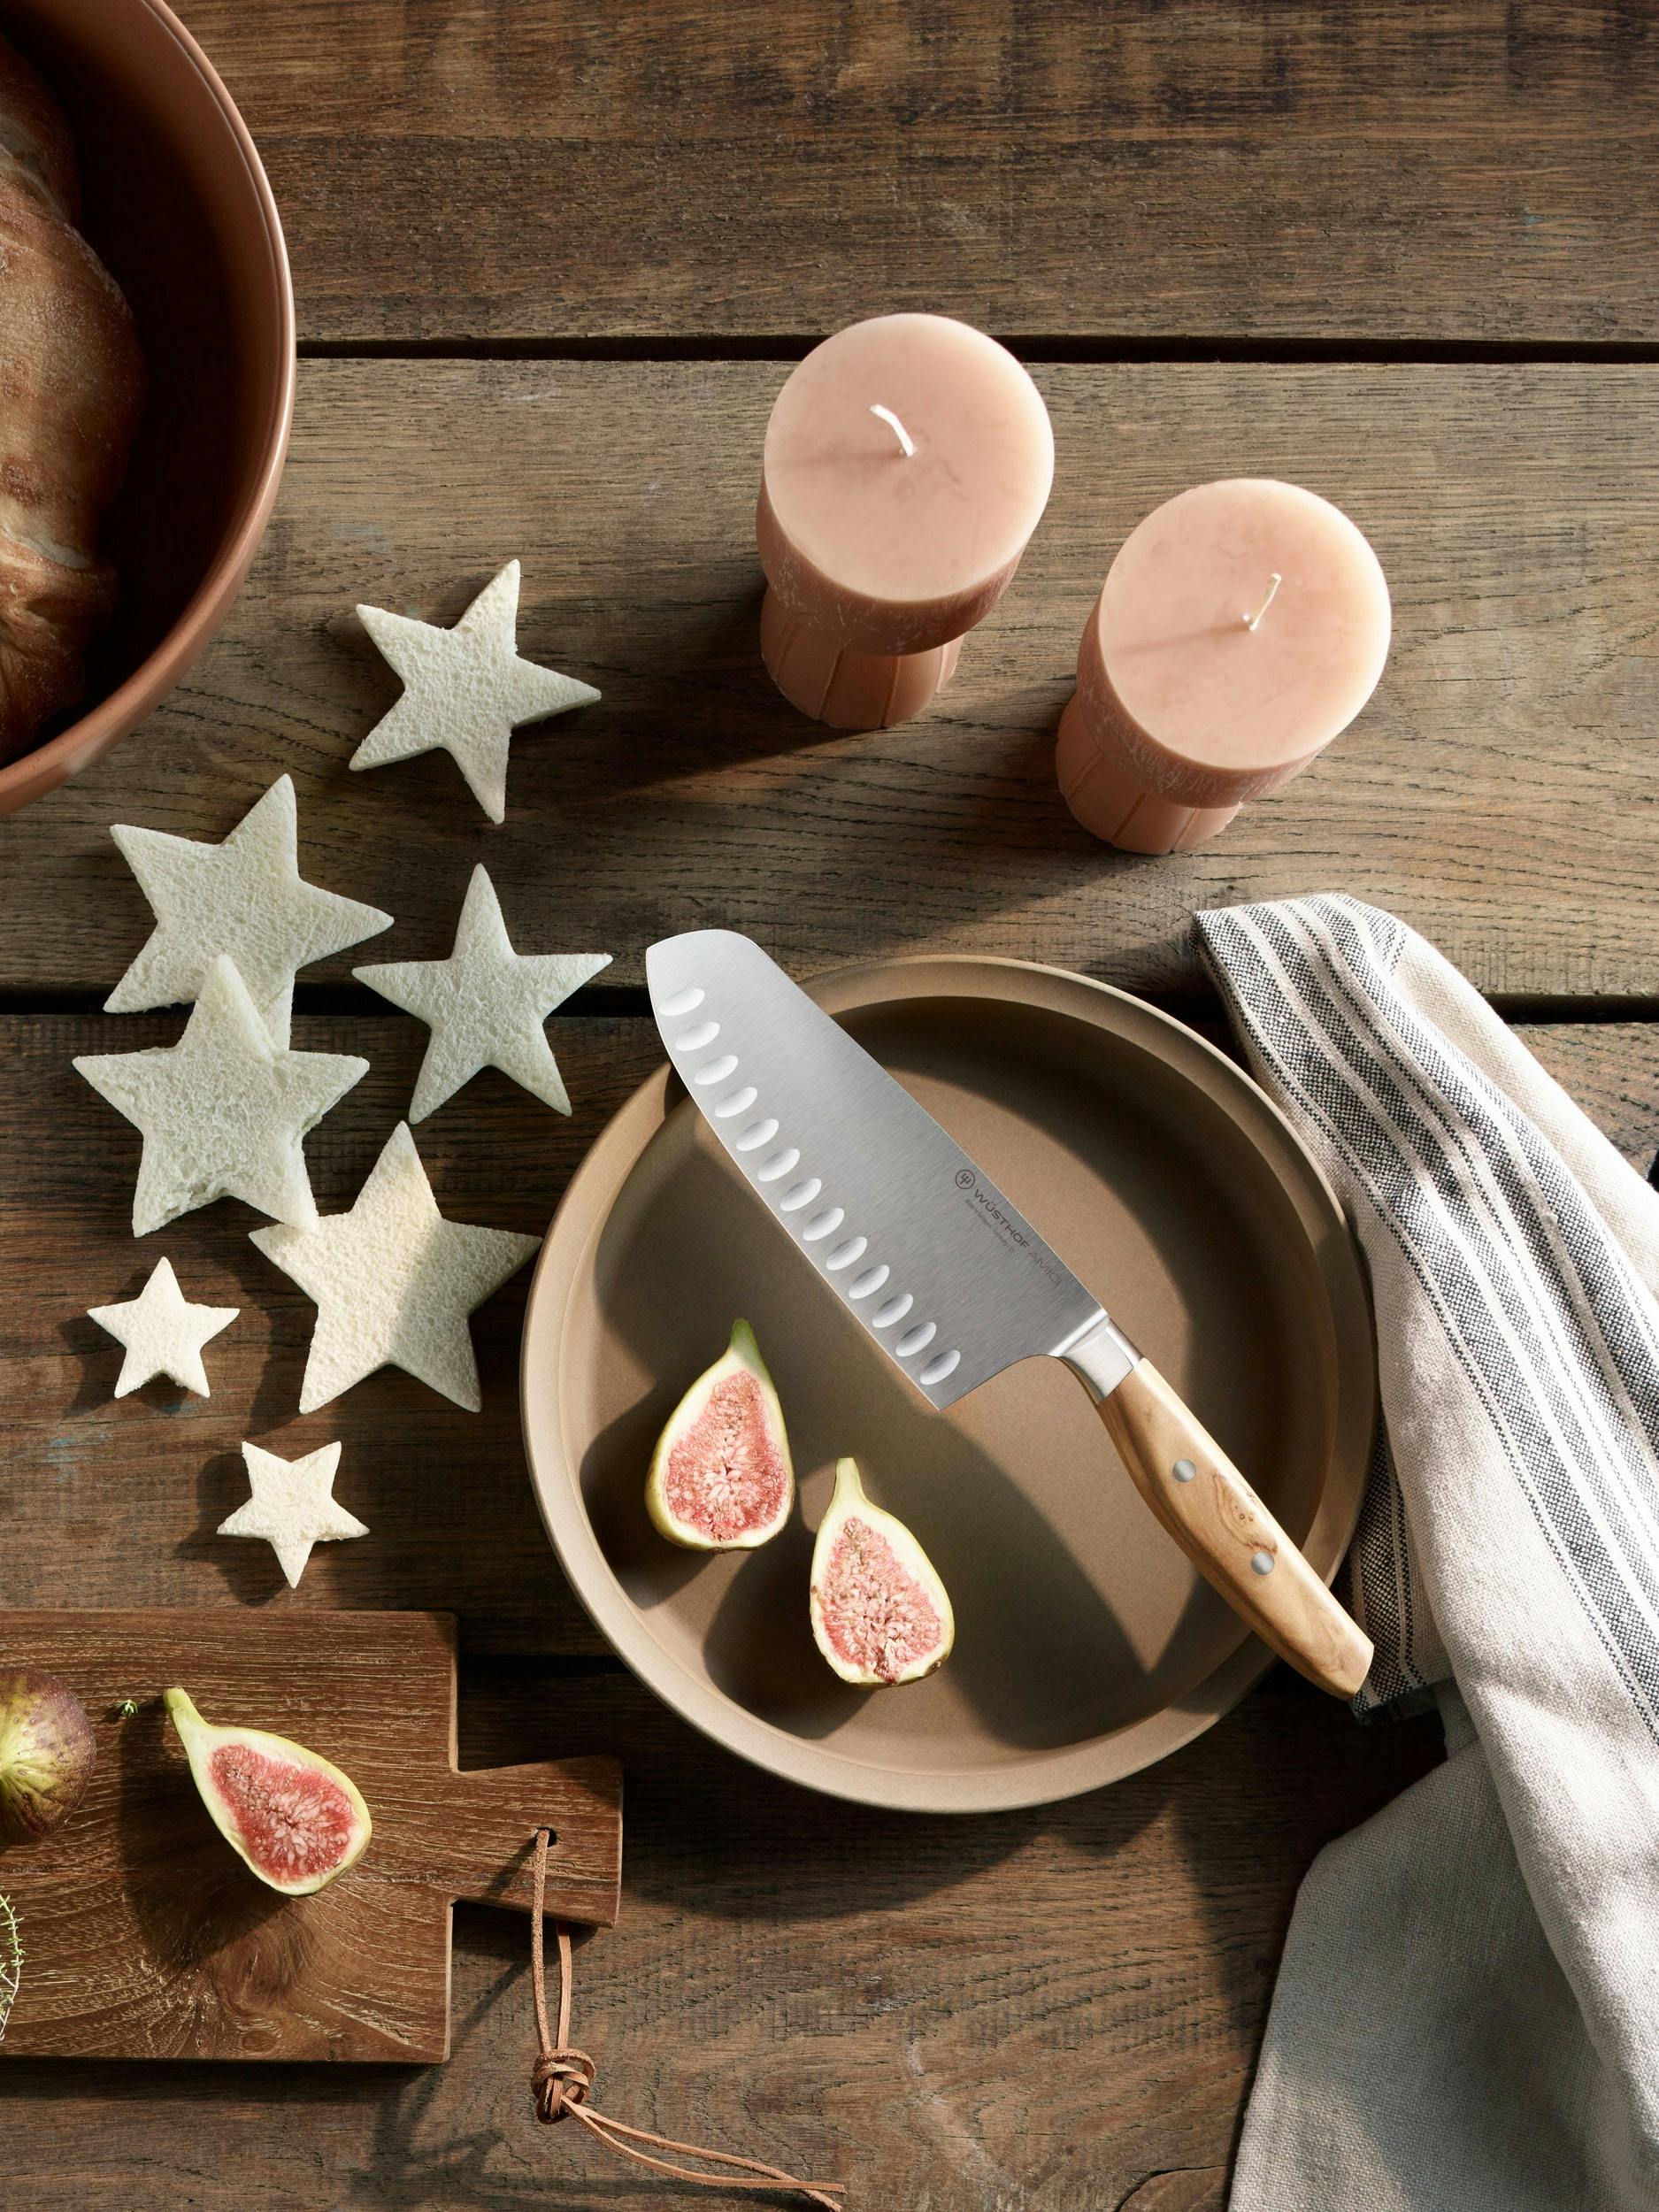 Amichi knife on table next to holiday cookies and candles